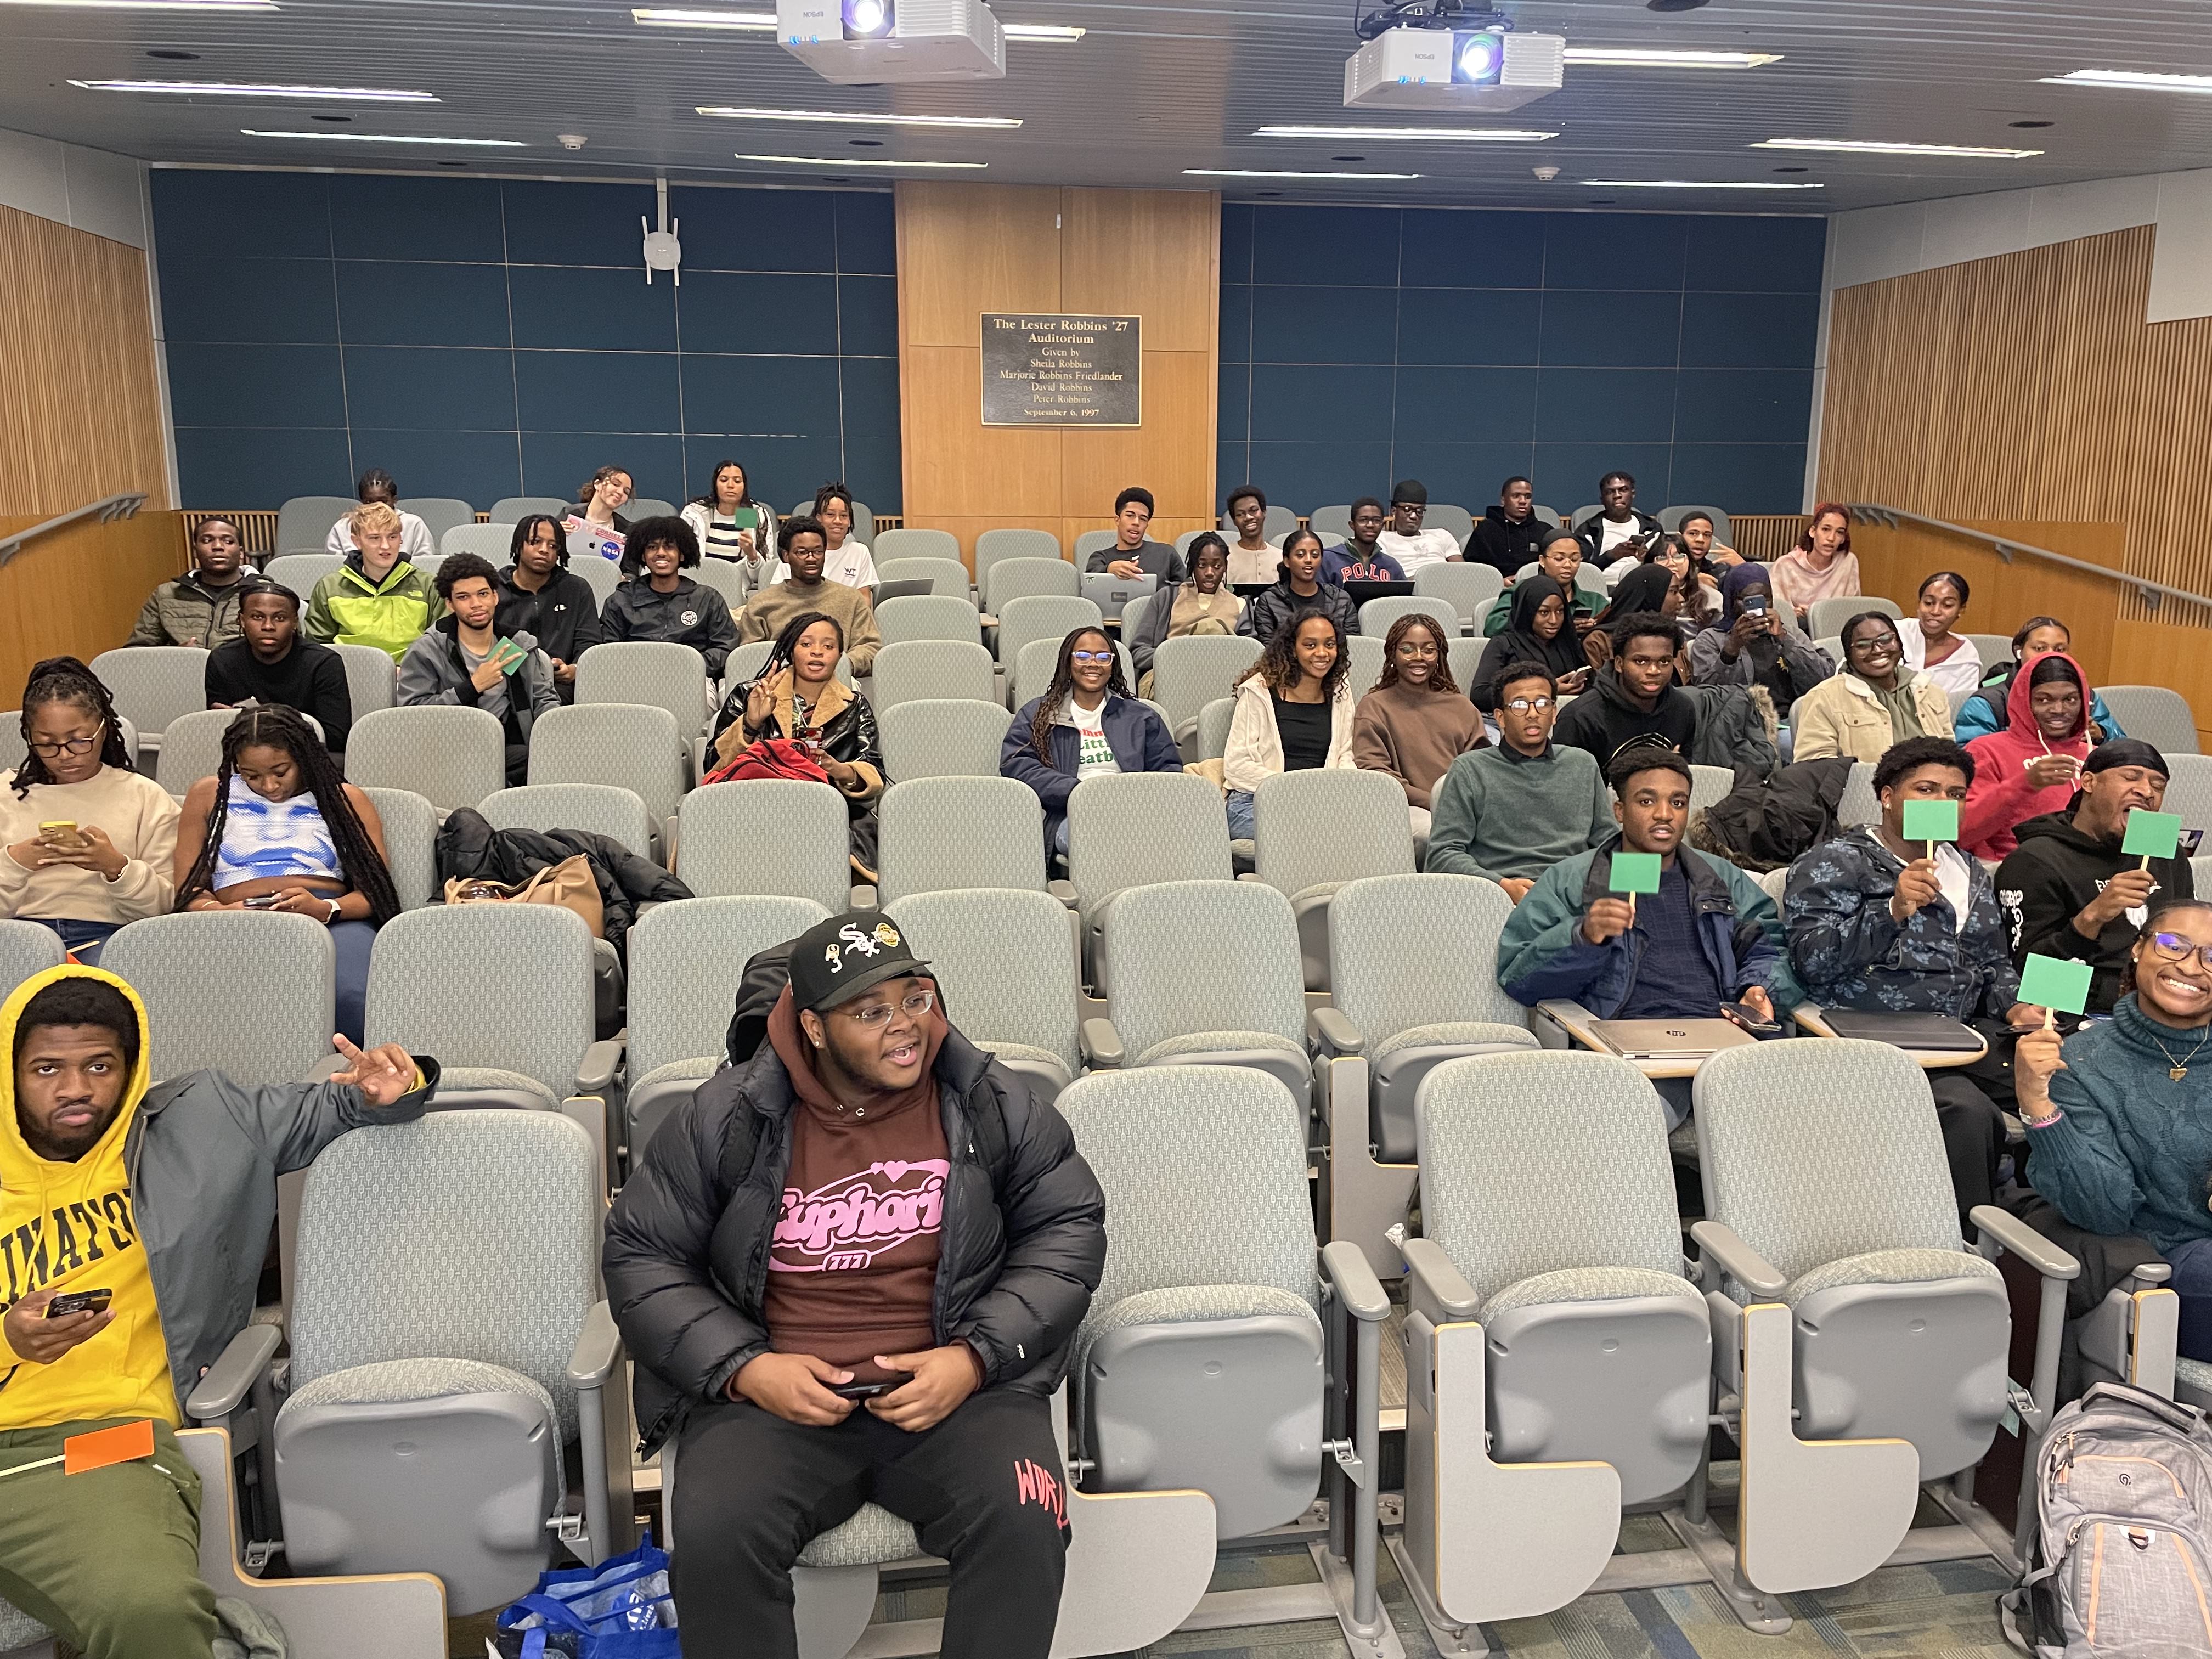 This image slider contains images of NSBE-CU's Hot Takes Social event. The first image of this slider depicts several NSBE members sitting together in a small lecture hall, posing for a picture.